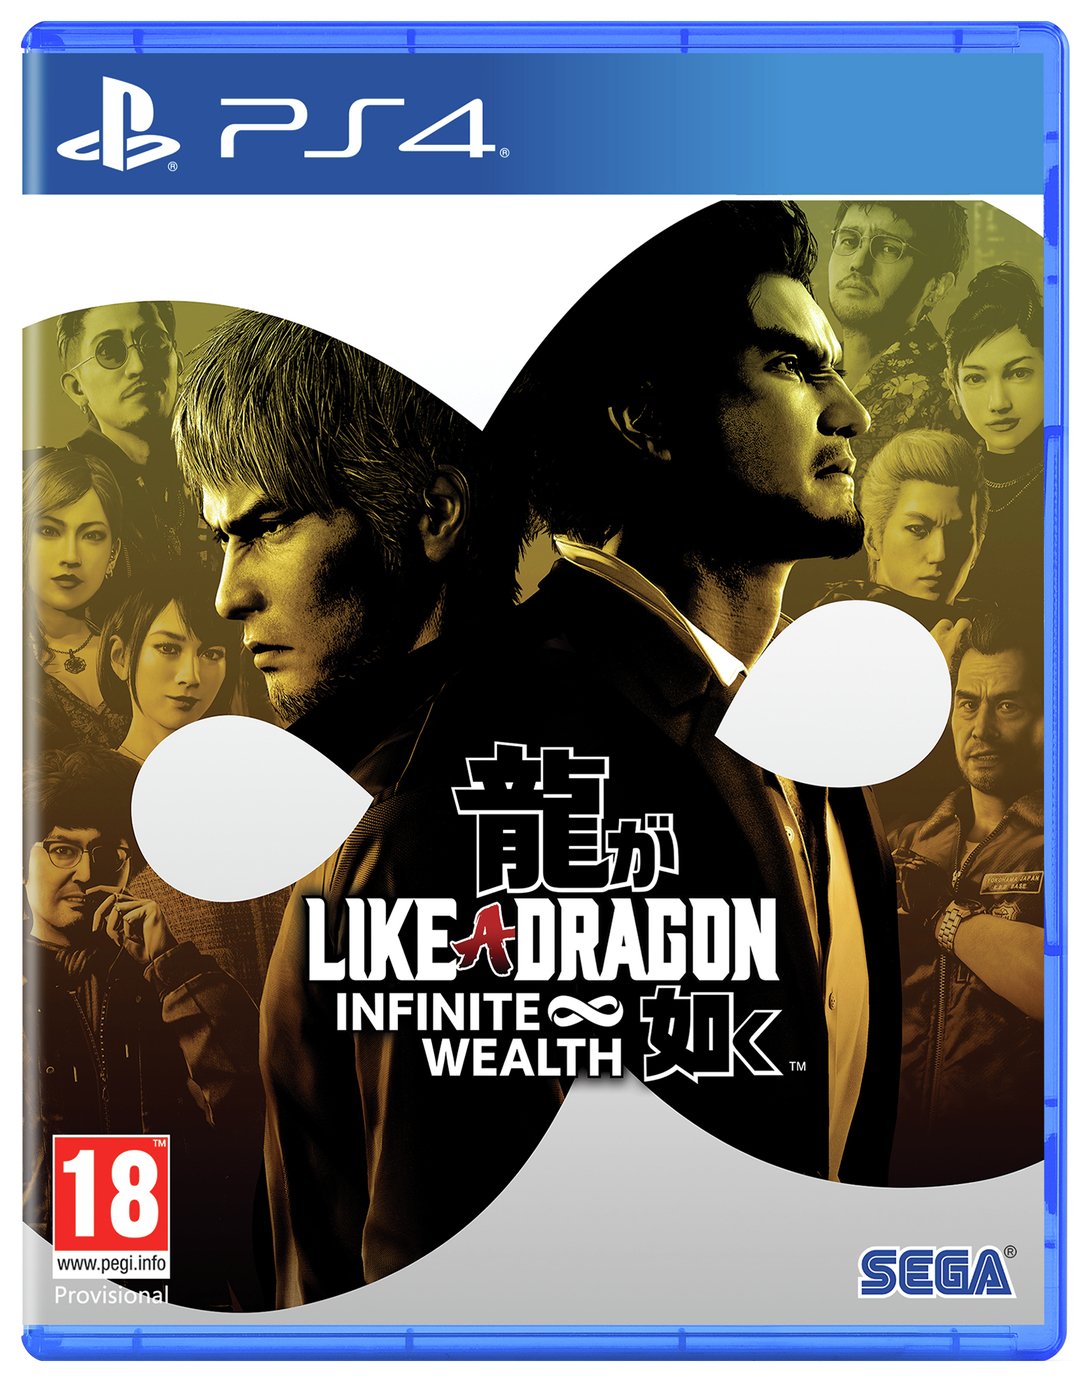 Like A Dragon: Infinite Wealth PS4 Game Pre-Order